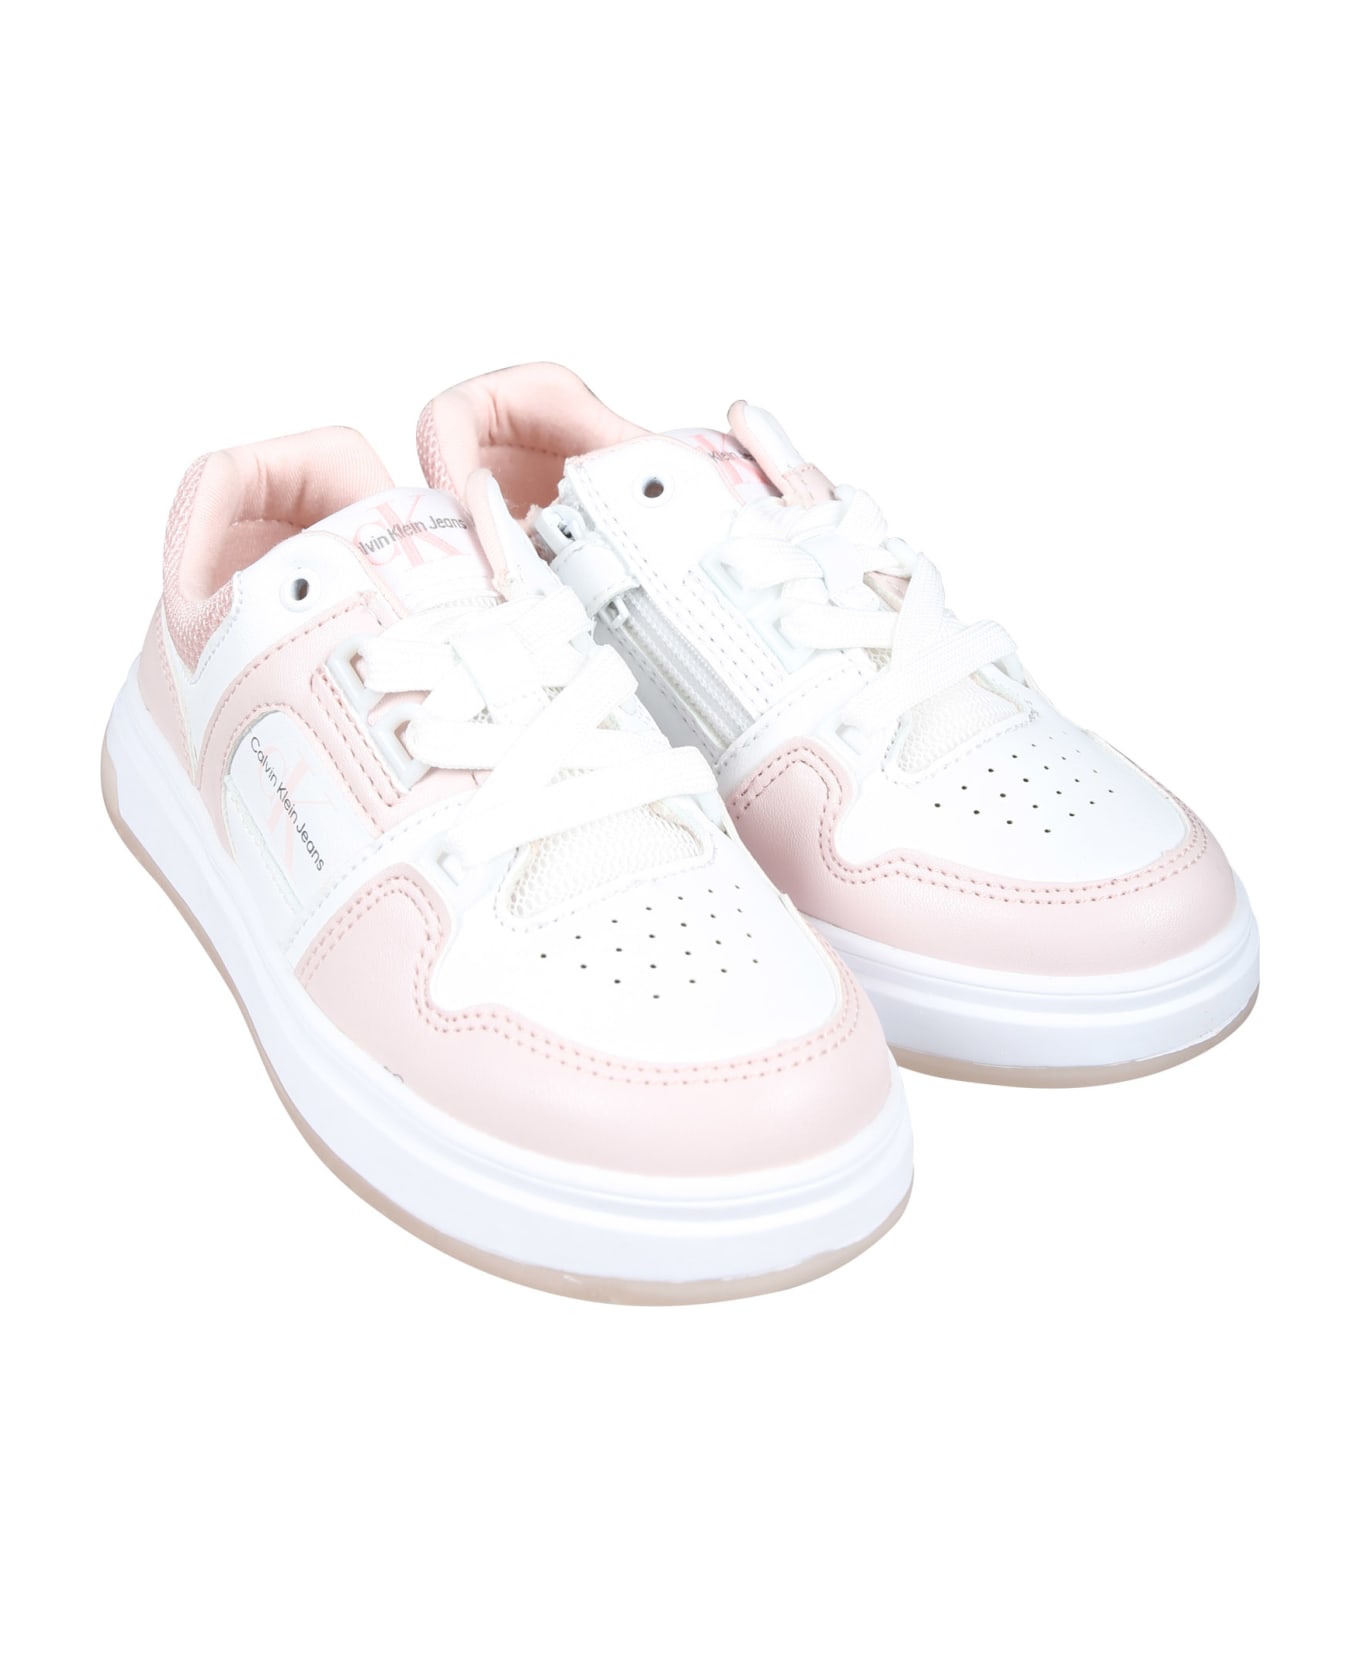 Calvin Klein Pink Sneakers For Girl With Logo - Pink シューズ